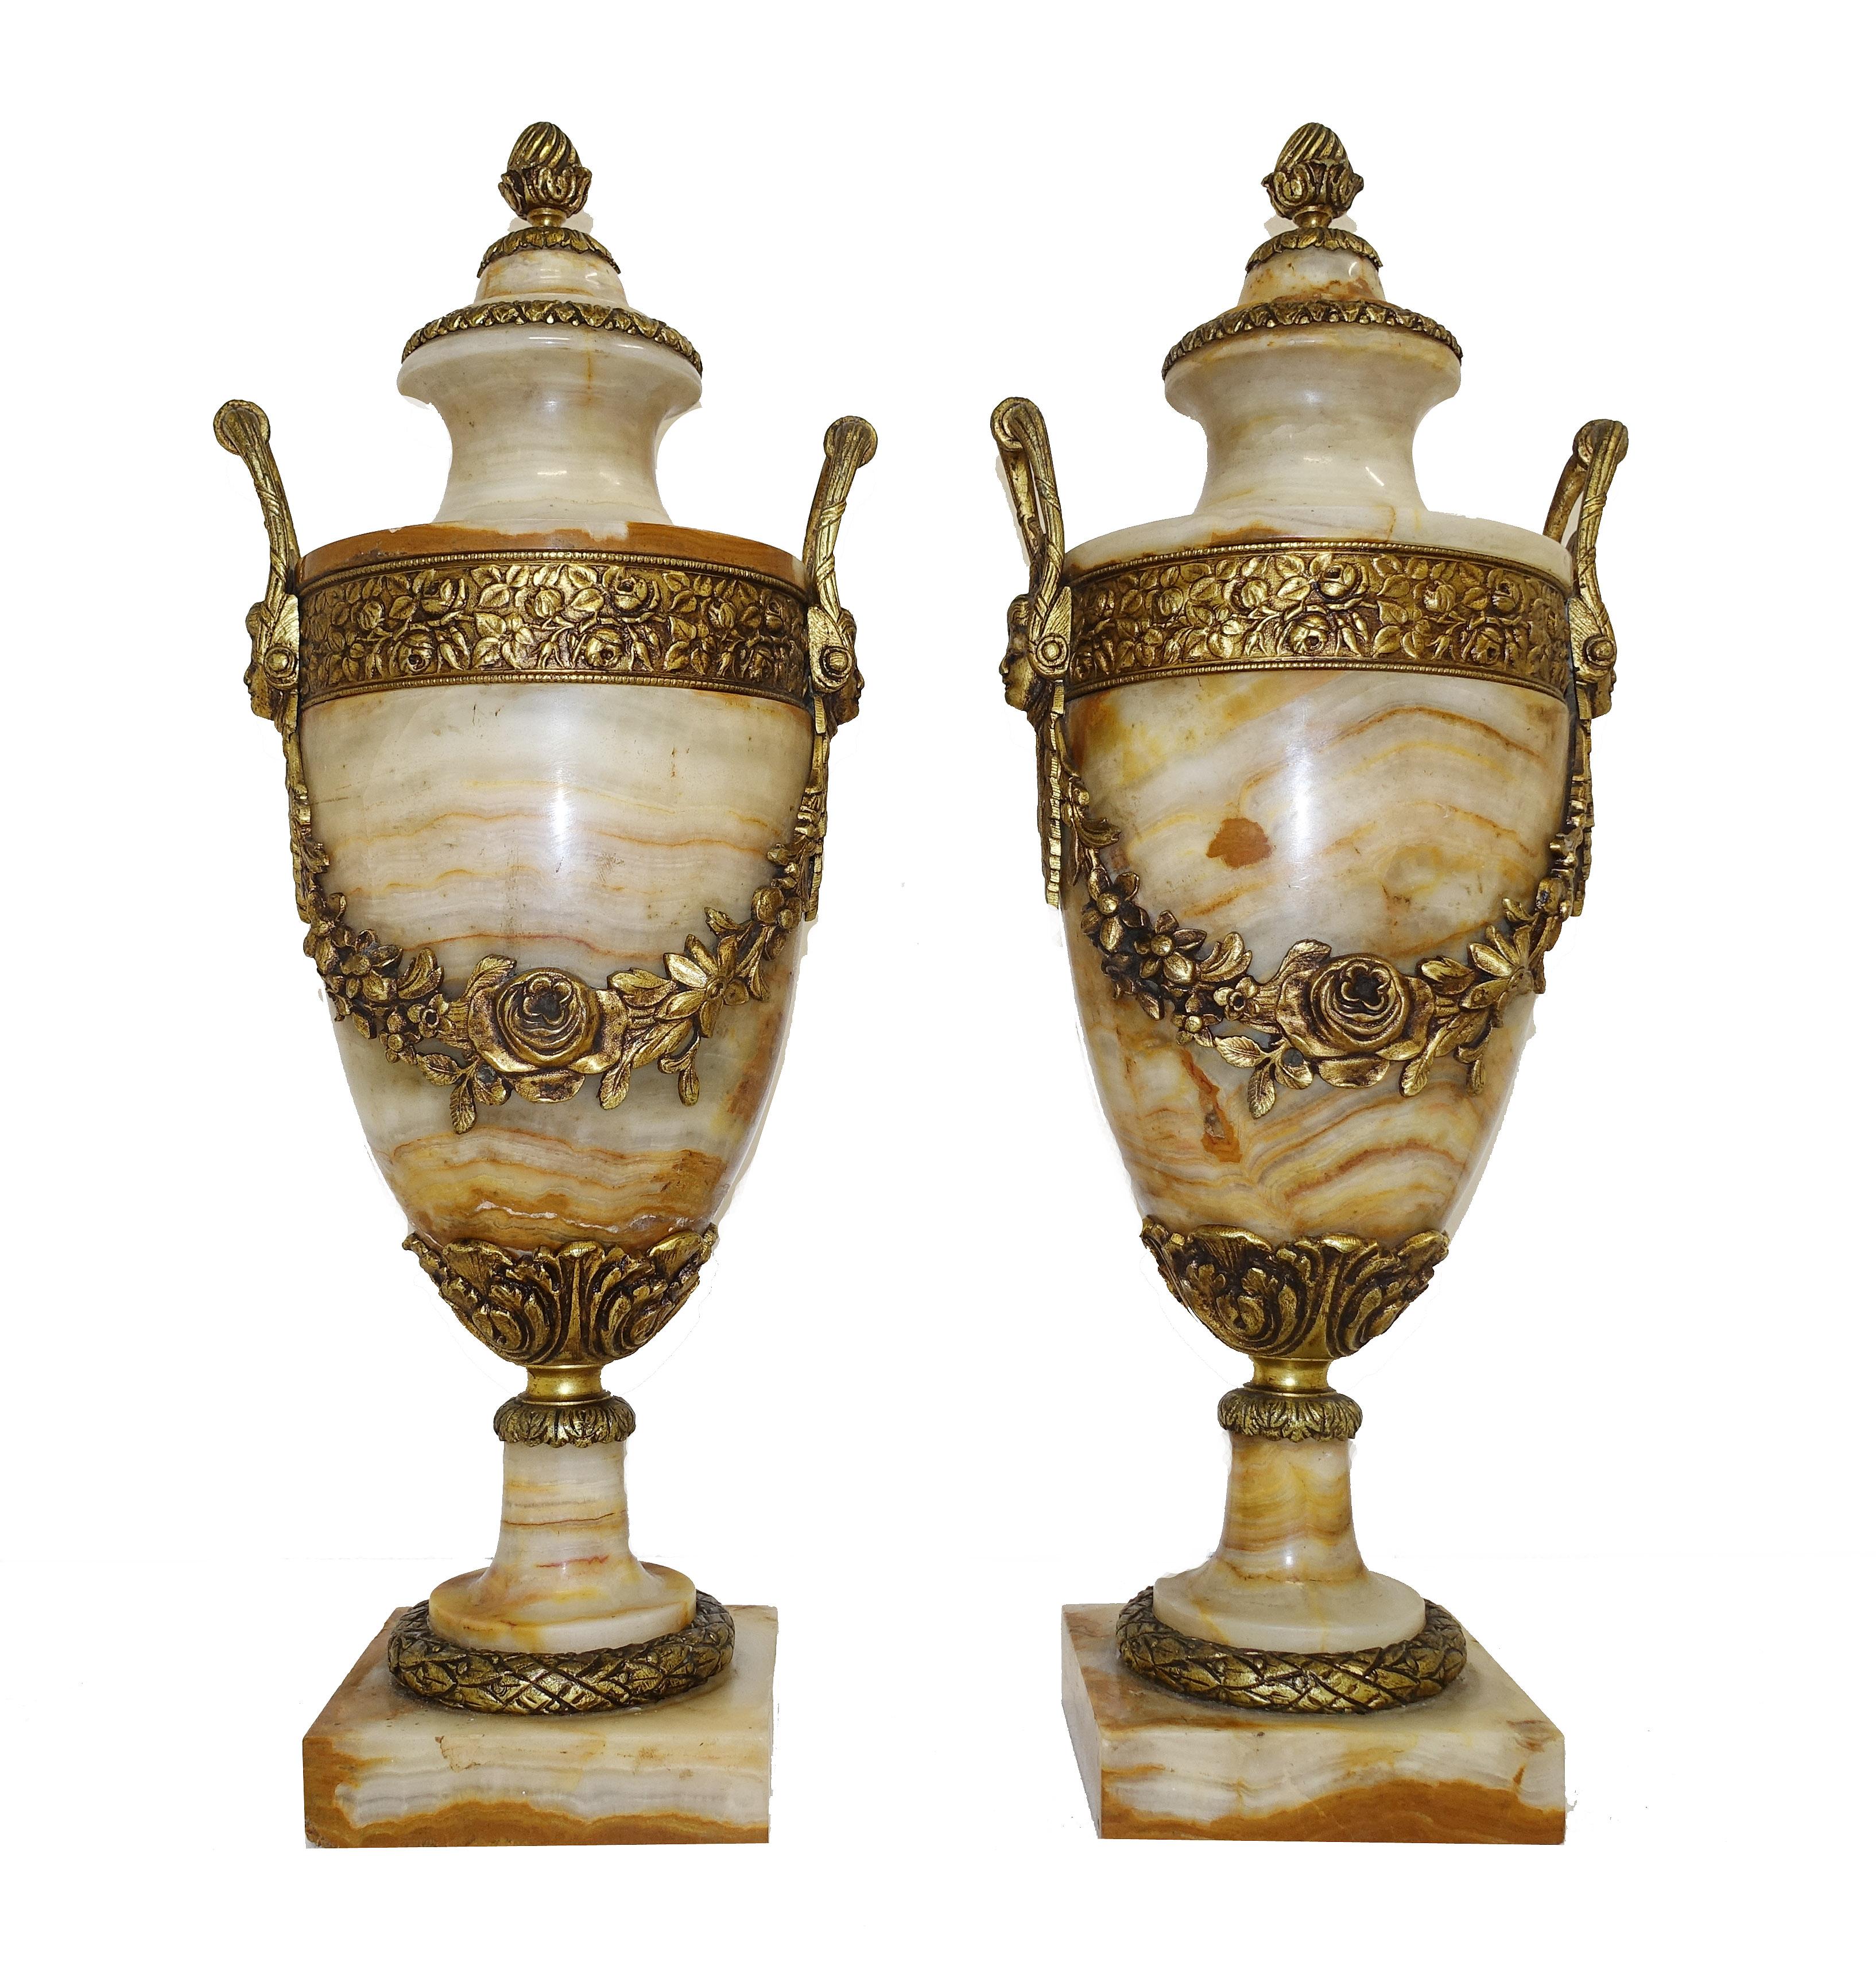 Elegant pair of French antique cassolettes or marble urns
Love the colour and tone of the marble in cream with flecks of burnt orange and sand colours
Great pair of classical amphora form, highly decorative and collectable
Features original ormolu